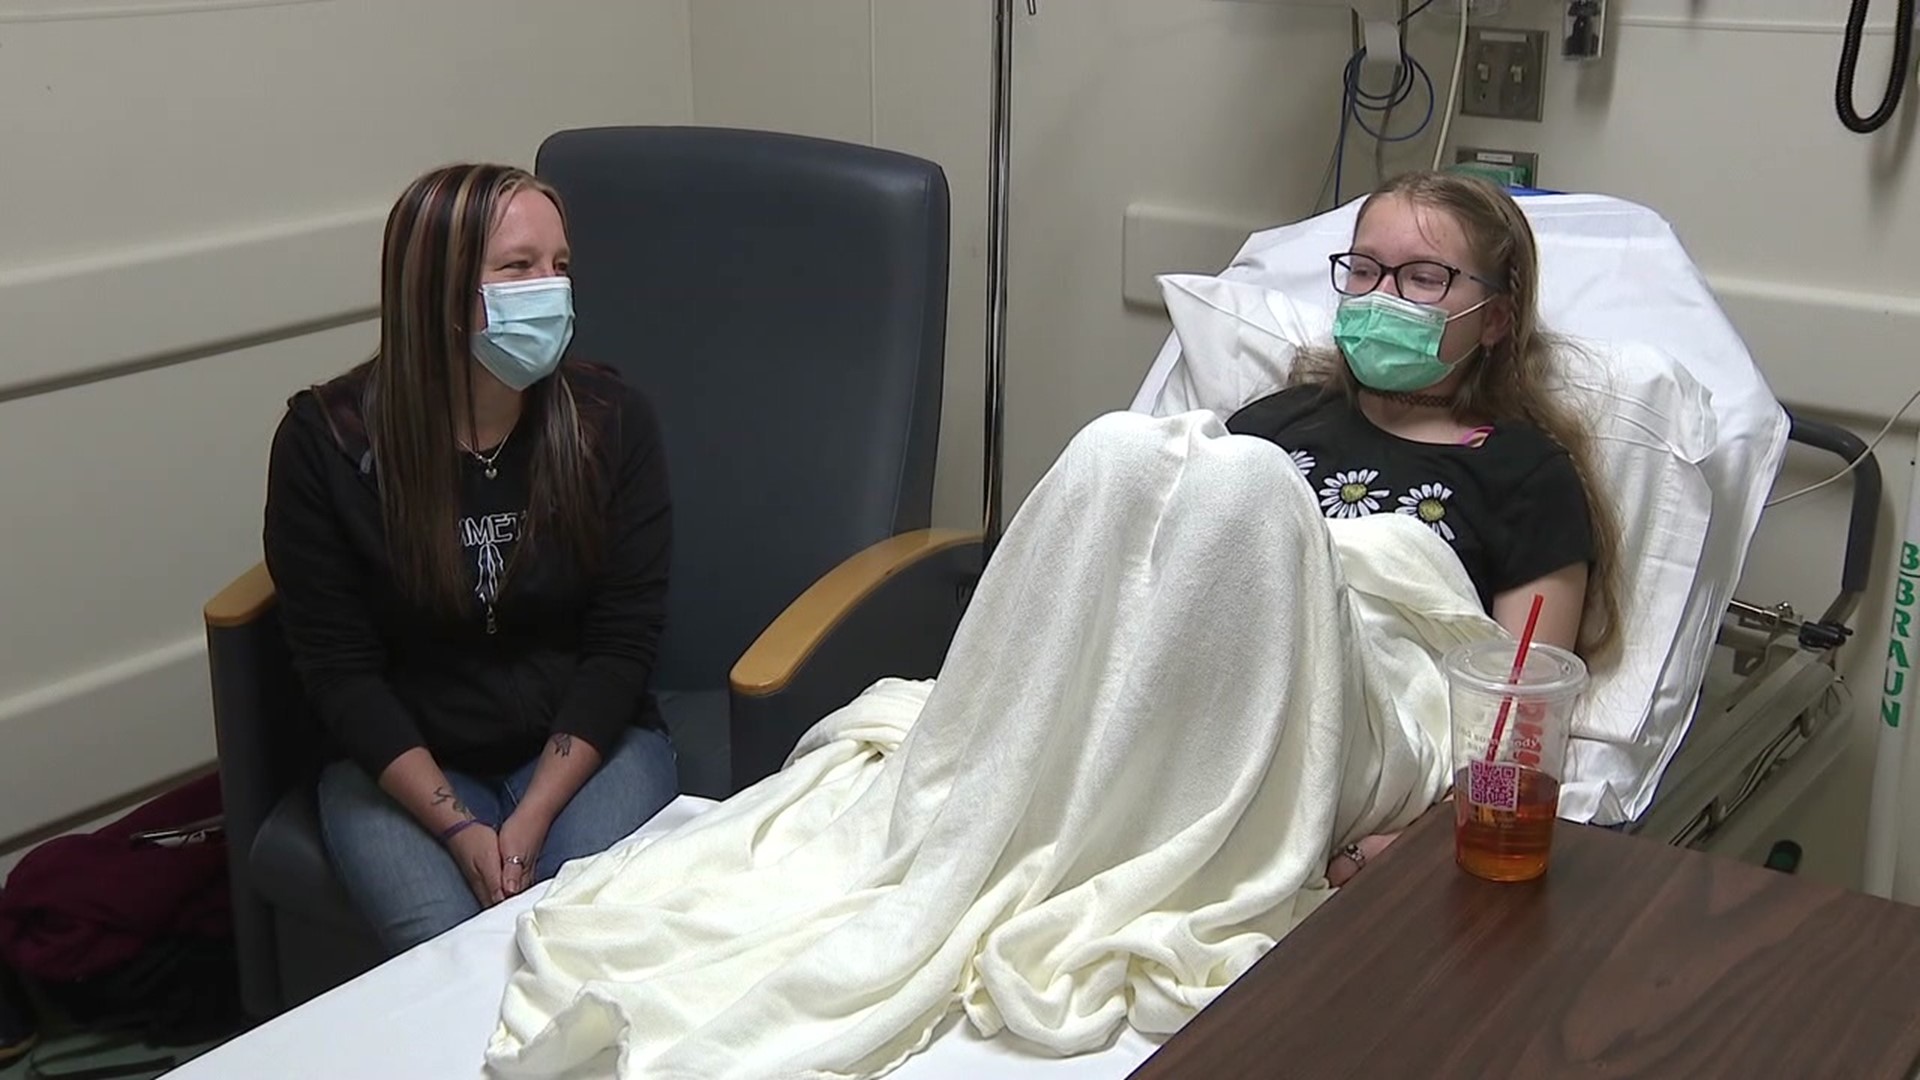 May is Crohn's Disease Awareness Month. Newswatch 16's Nikki Krize shows us how a teenager from Clarks Summit is managing her Crohn's symptoms.